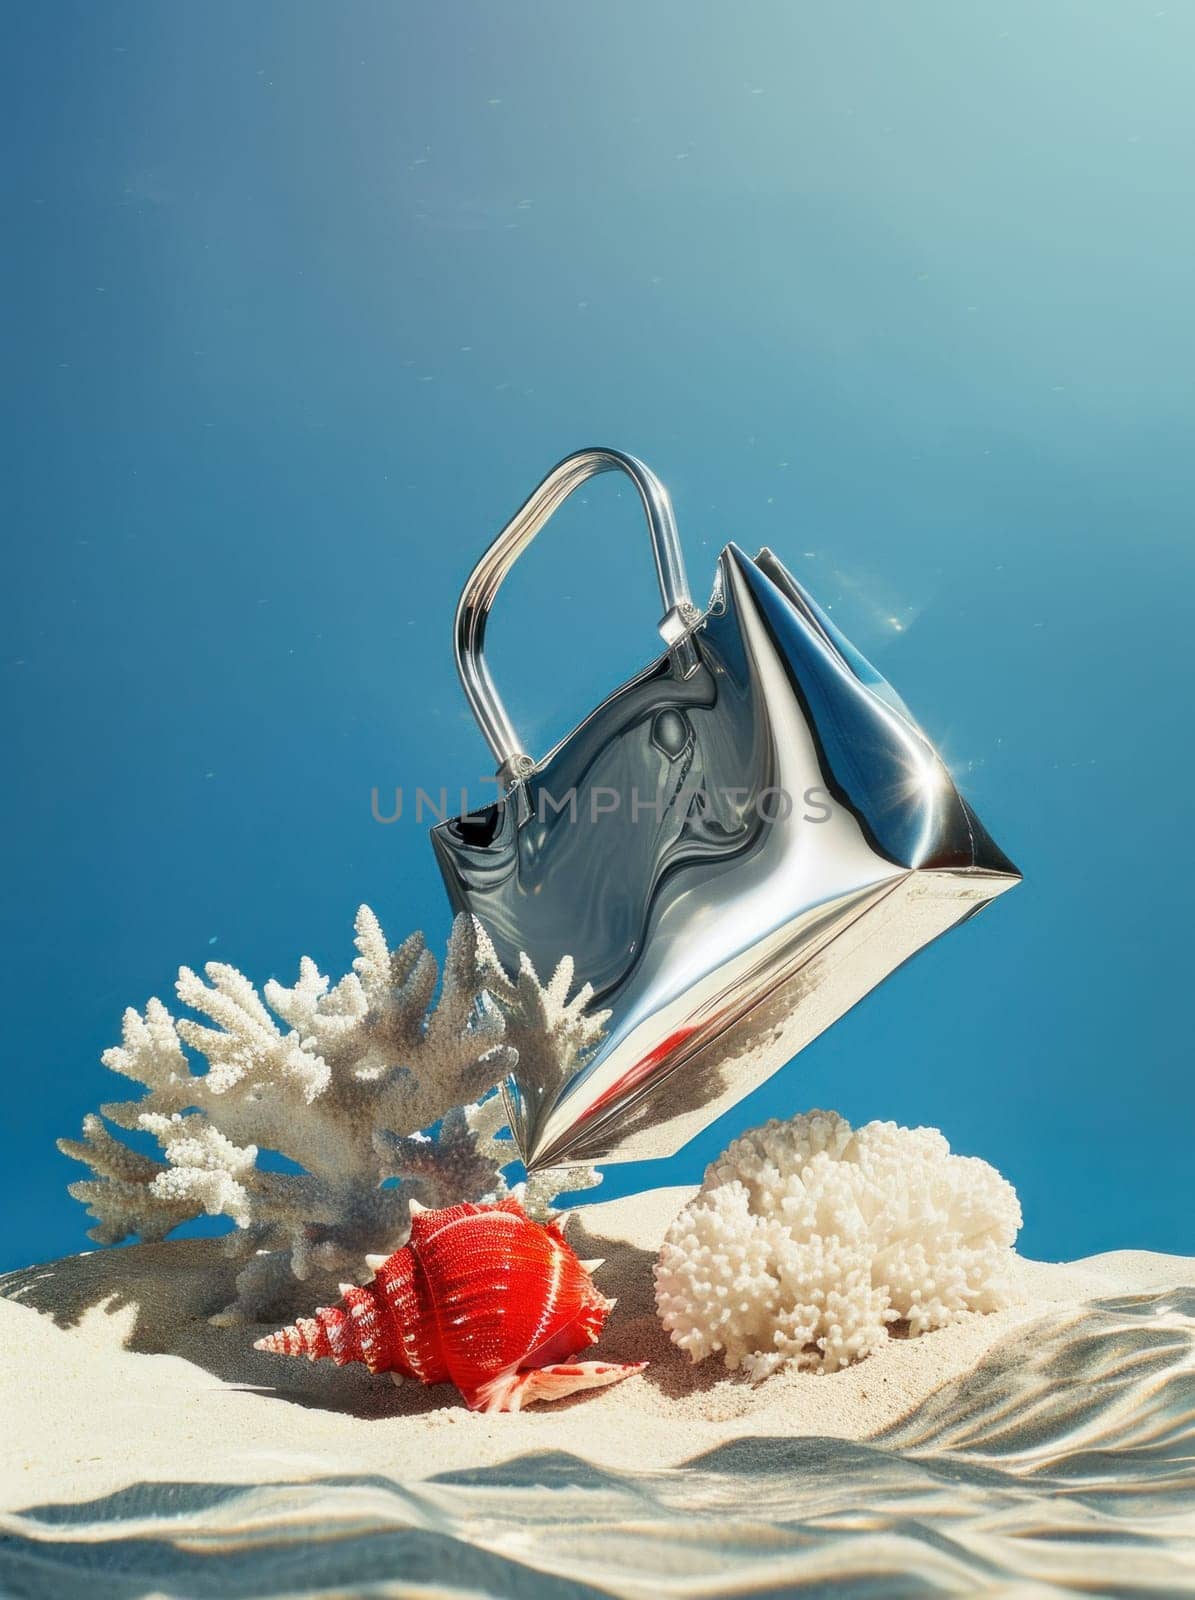 Fashionable silver handbag with seashell and starfish on sandy beach for summer travel collection by Vichizh